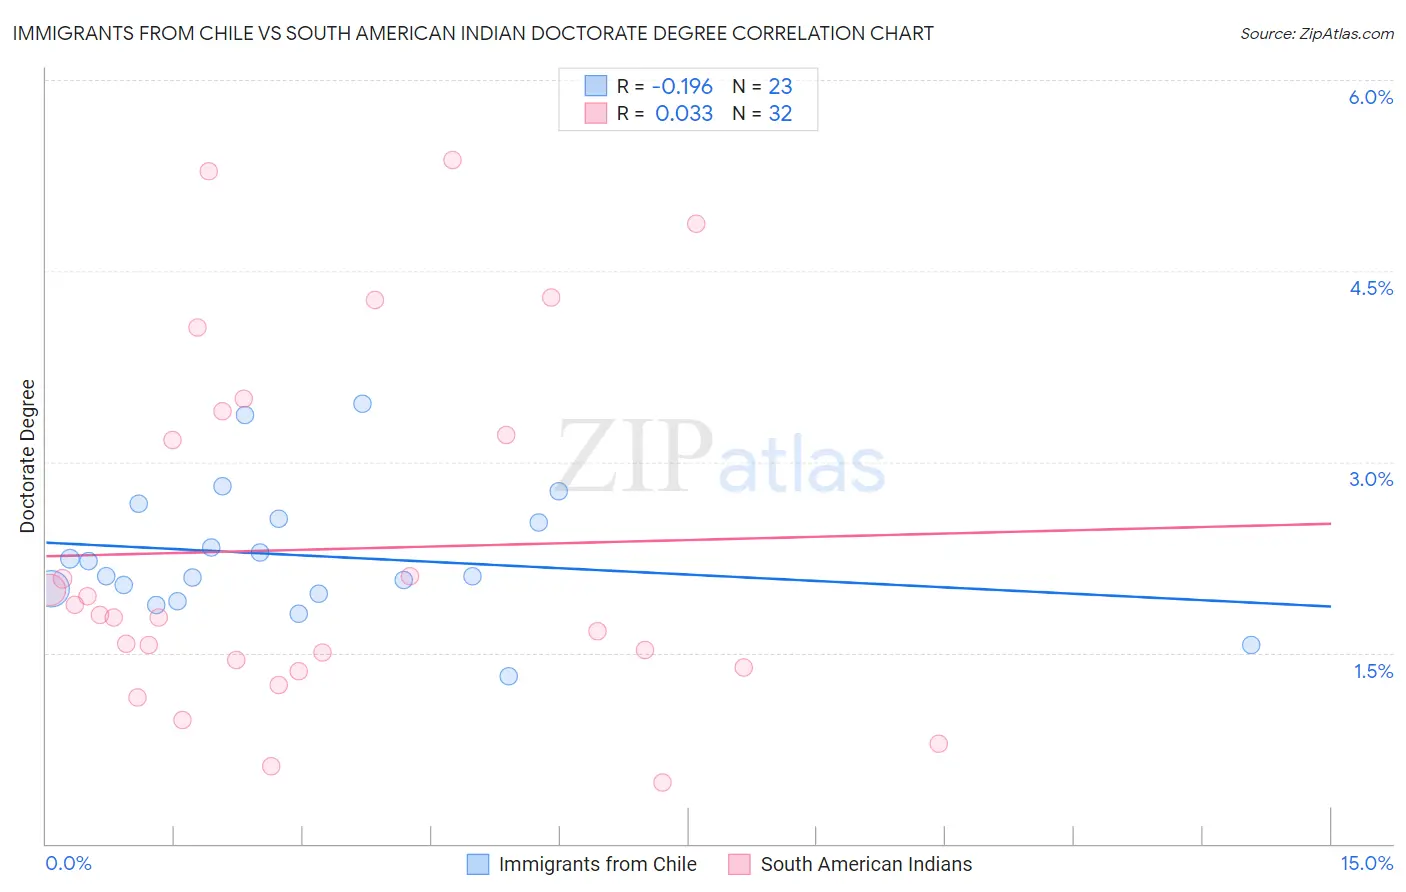 Immigrants from Chile vs South American Indian Doctorate Degree